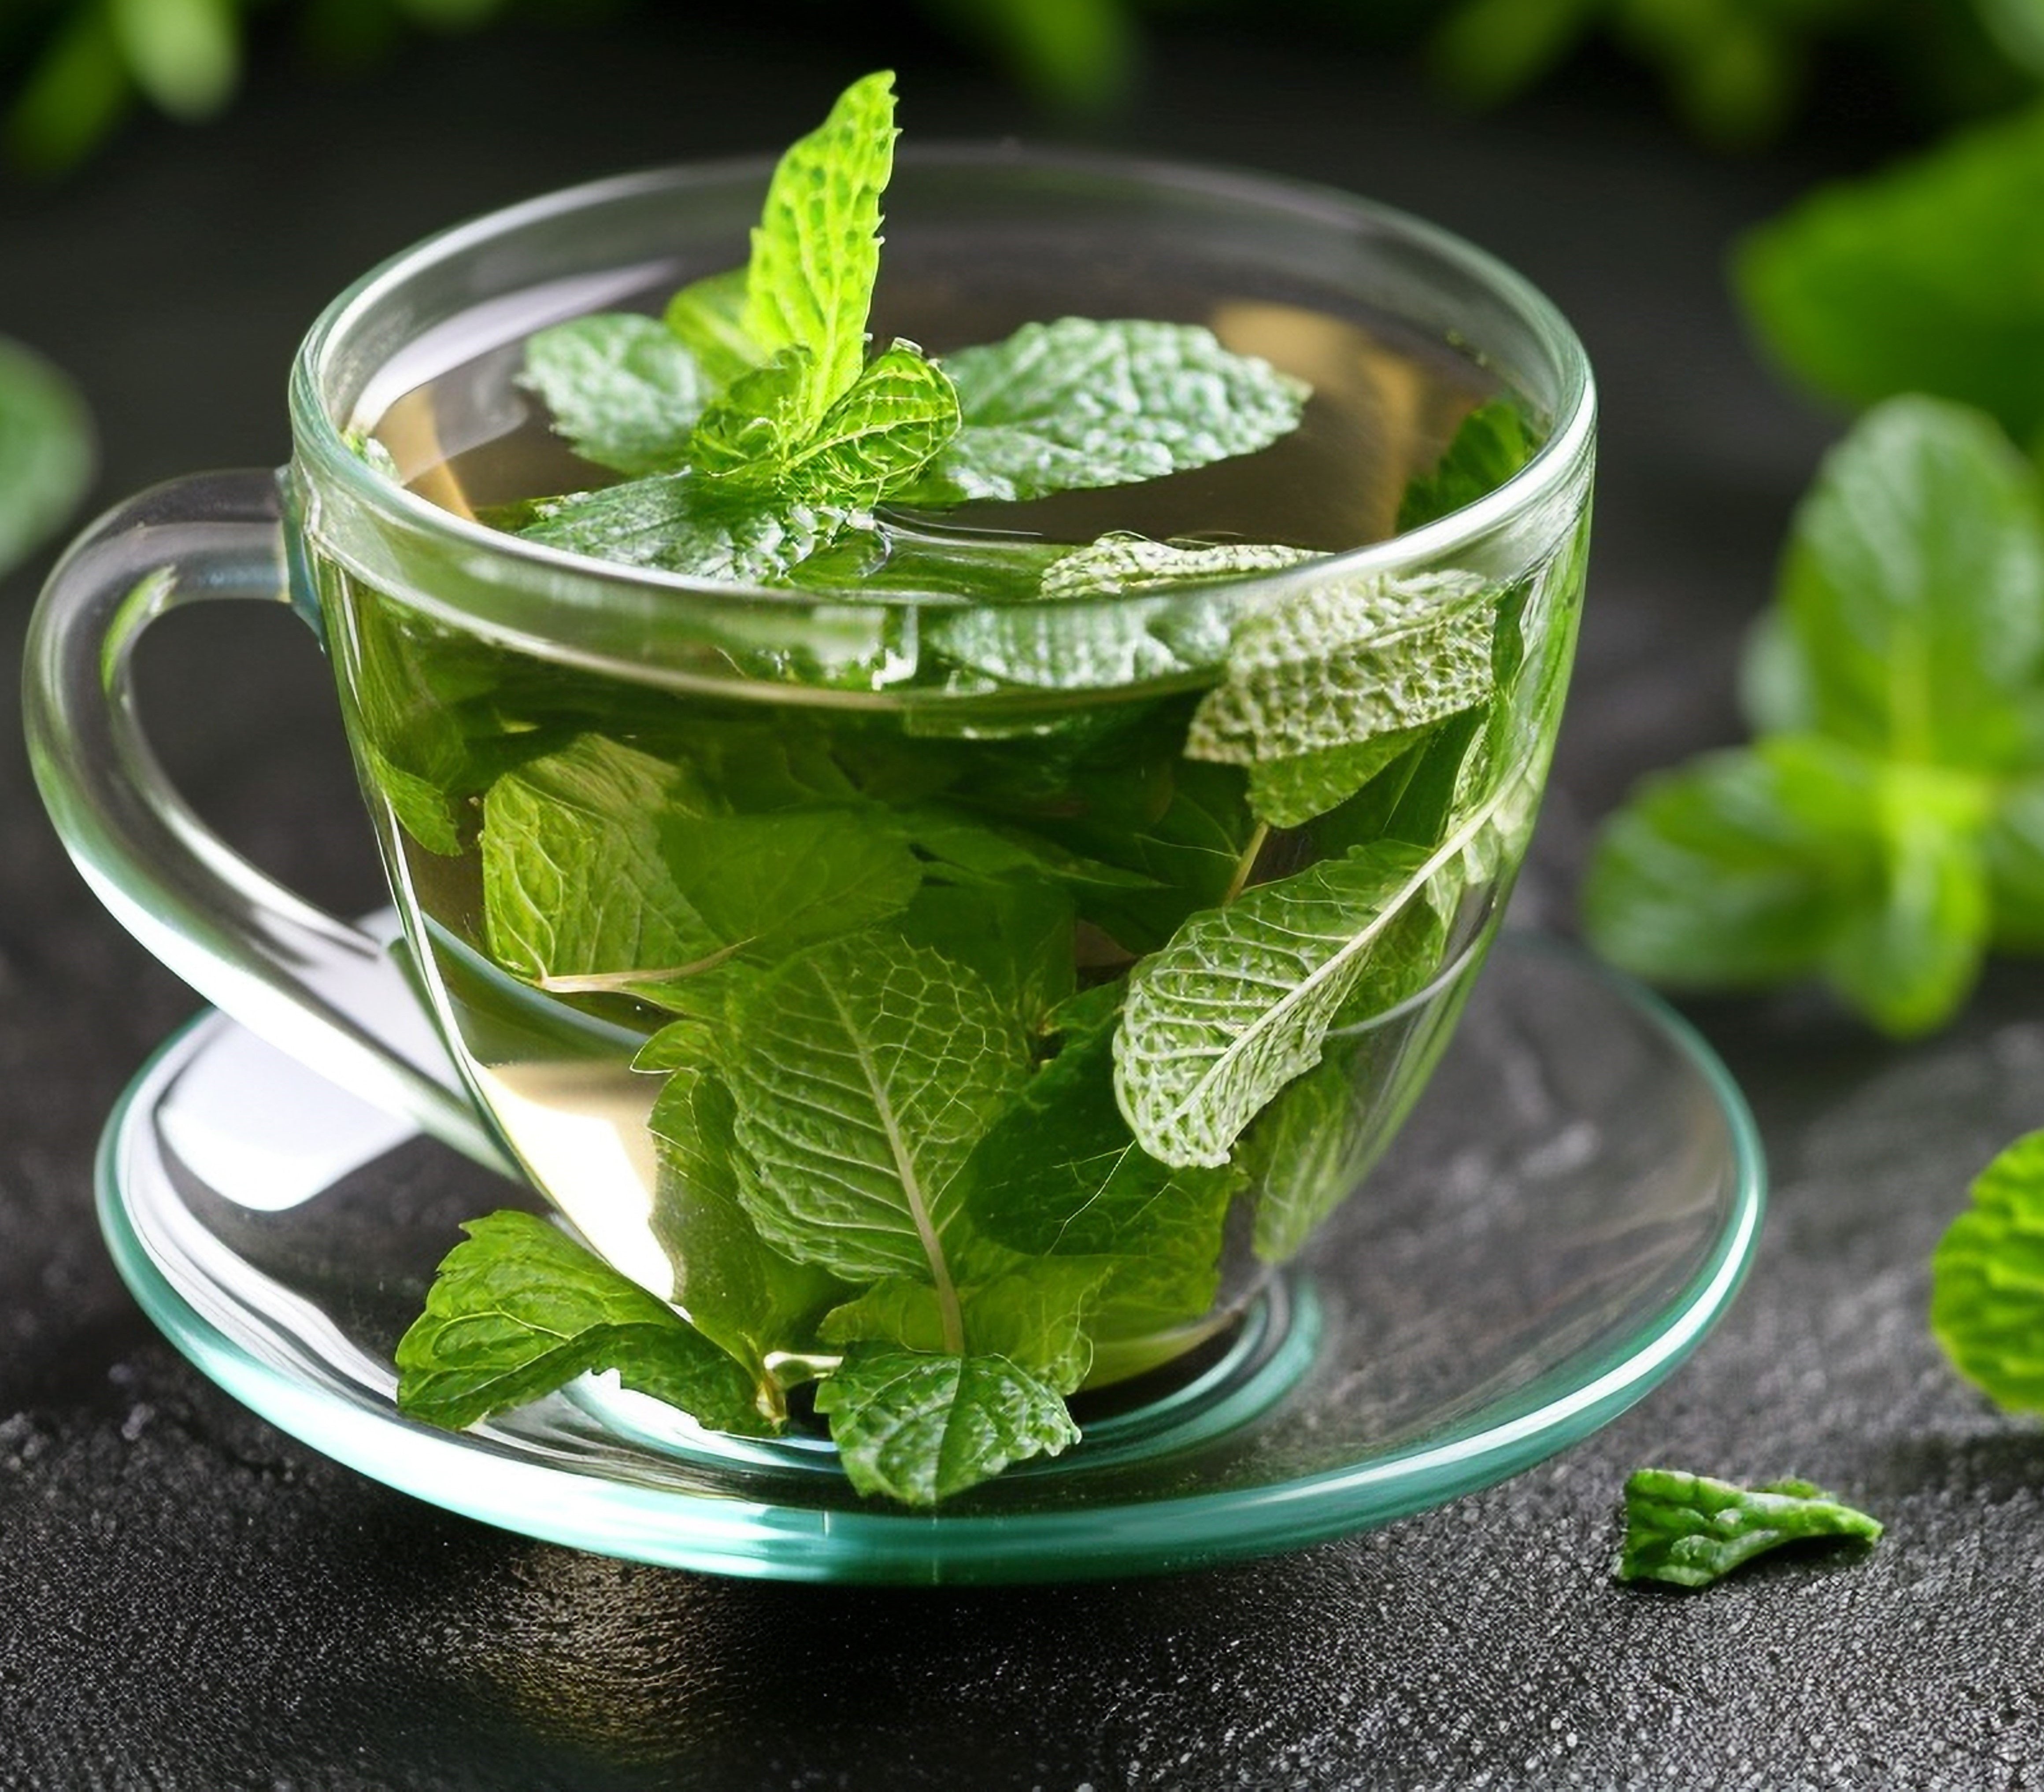 Peppermint – a beautifully scented herb with special health properties